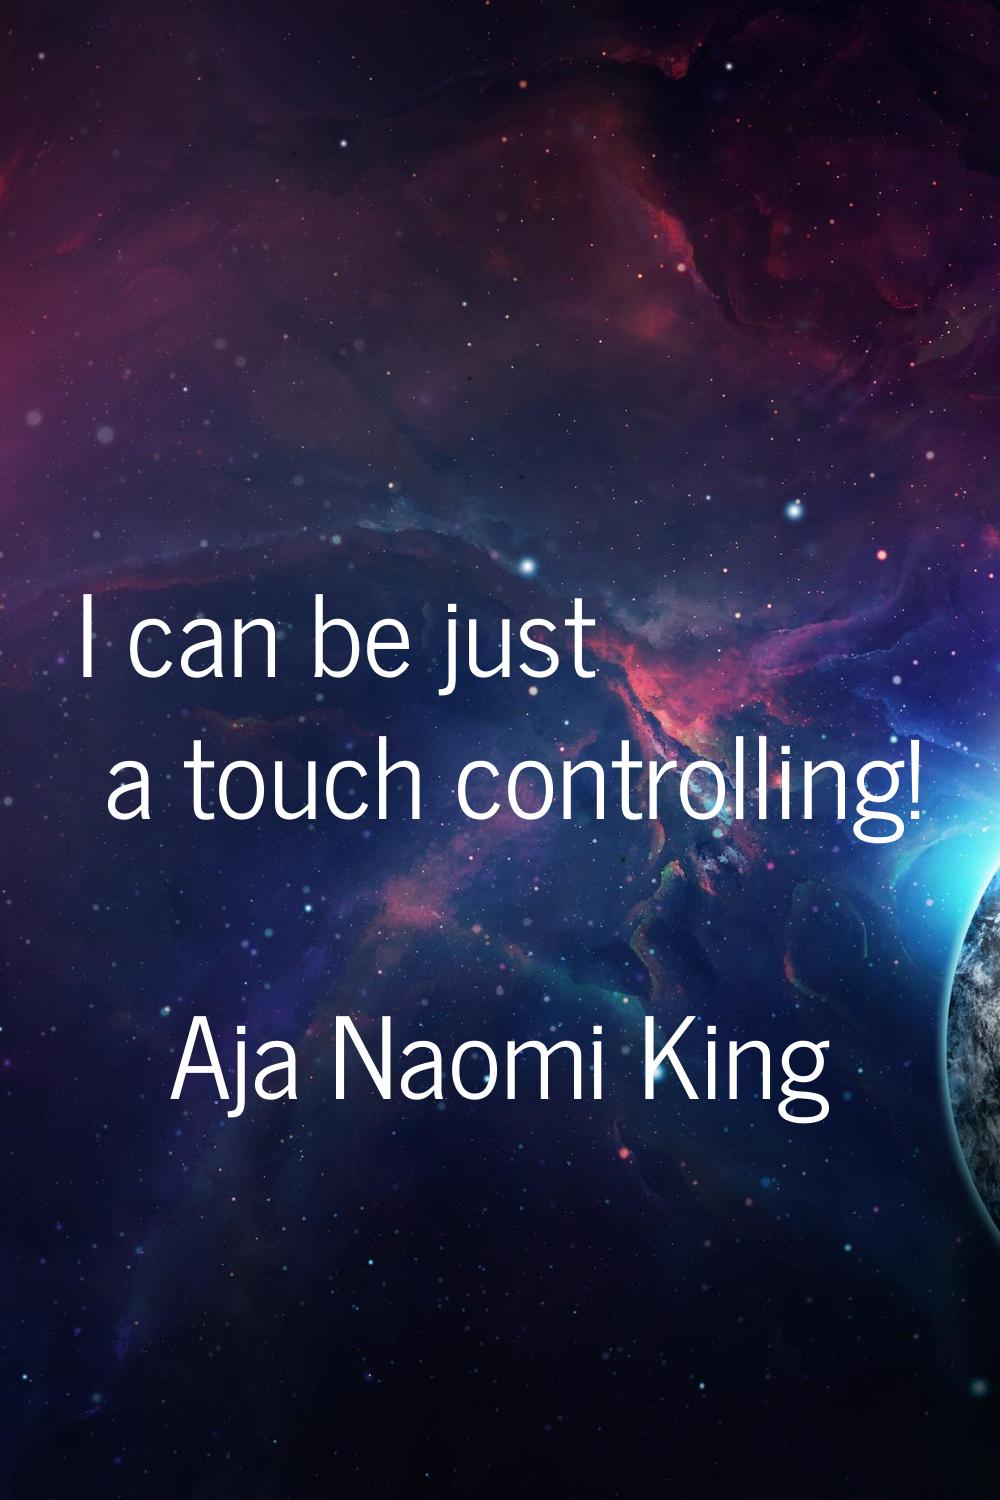 I can be just a touch controlling!